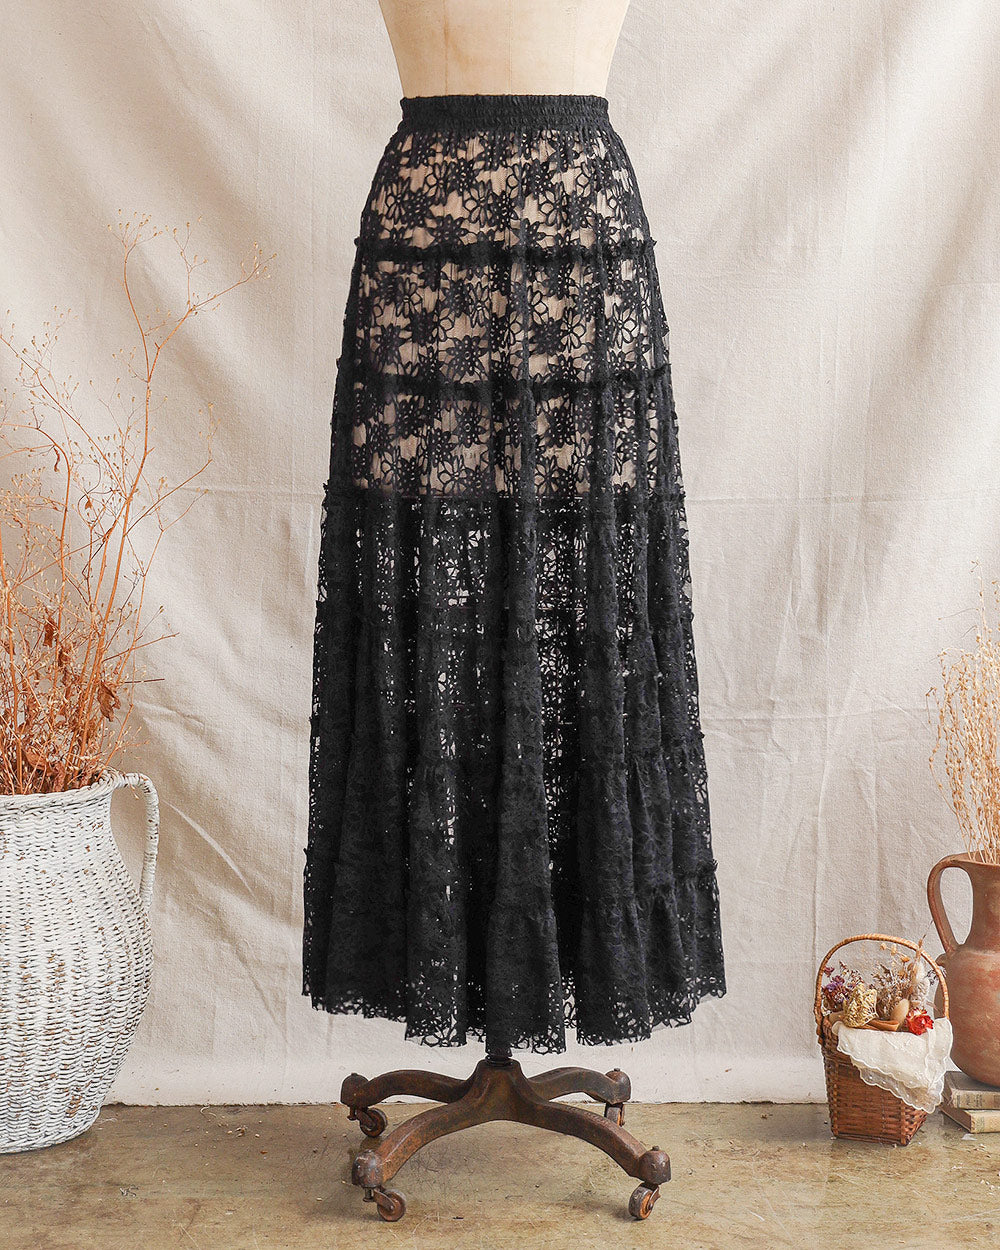 Vintage Inspired Black Lace Tiered Maxi Skirt / Adored Vintage /  Fritillaria Persica Skirt